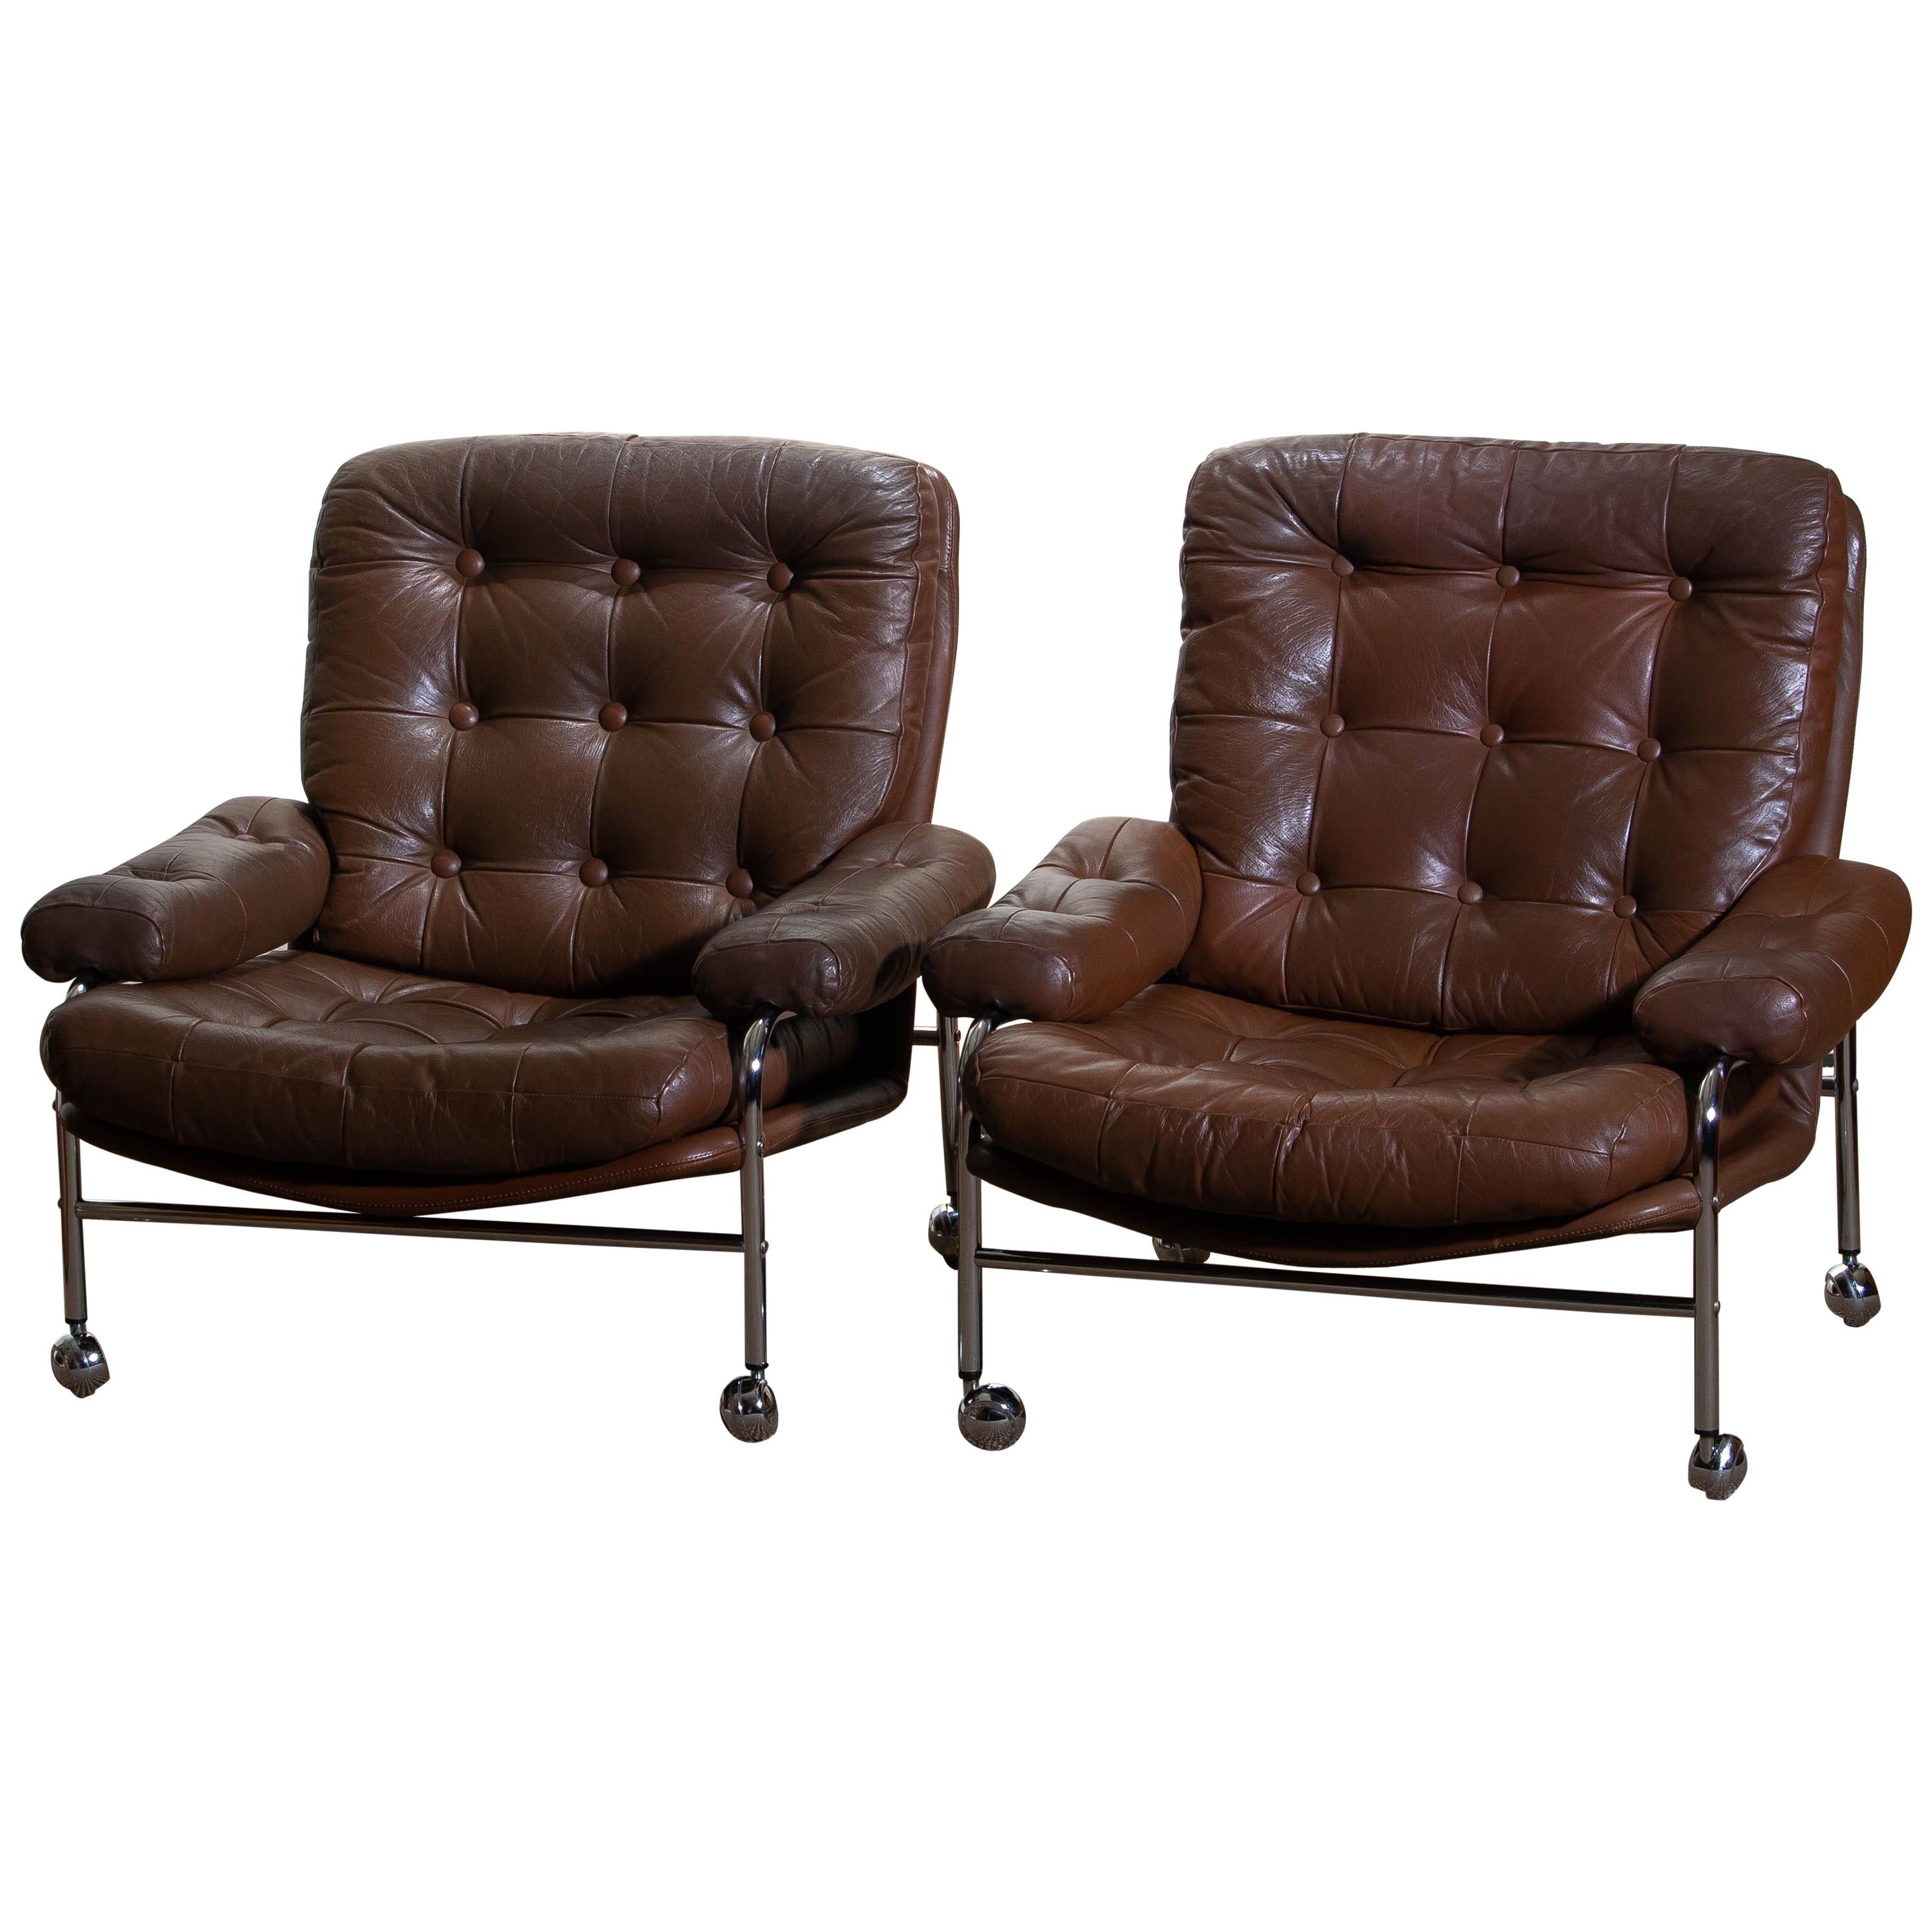 1970s, Chrome and Brown Leather Easy / Lounge Chairs by Scapa Rydaholm, Sweden